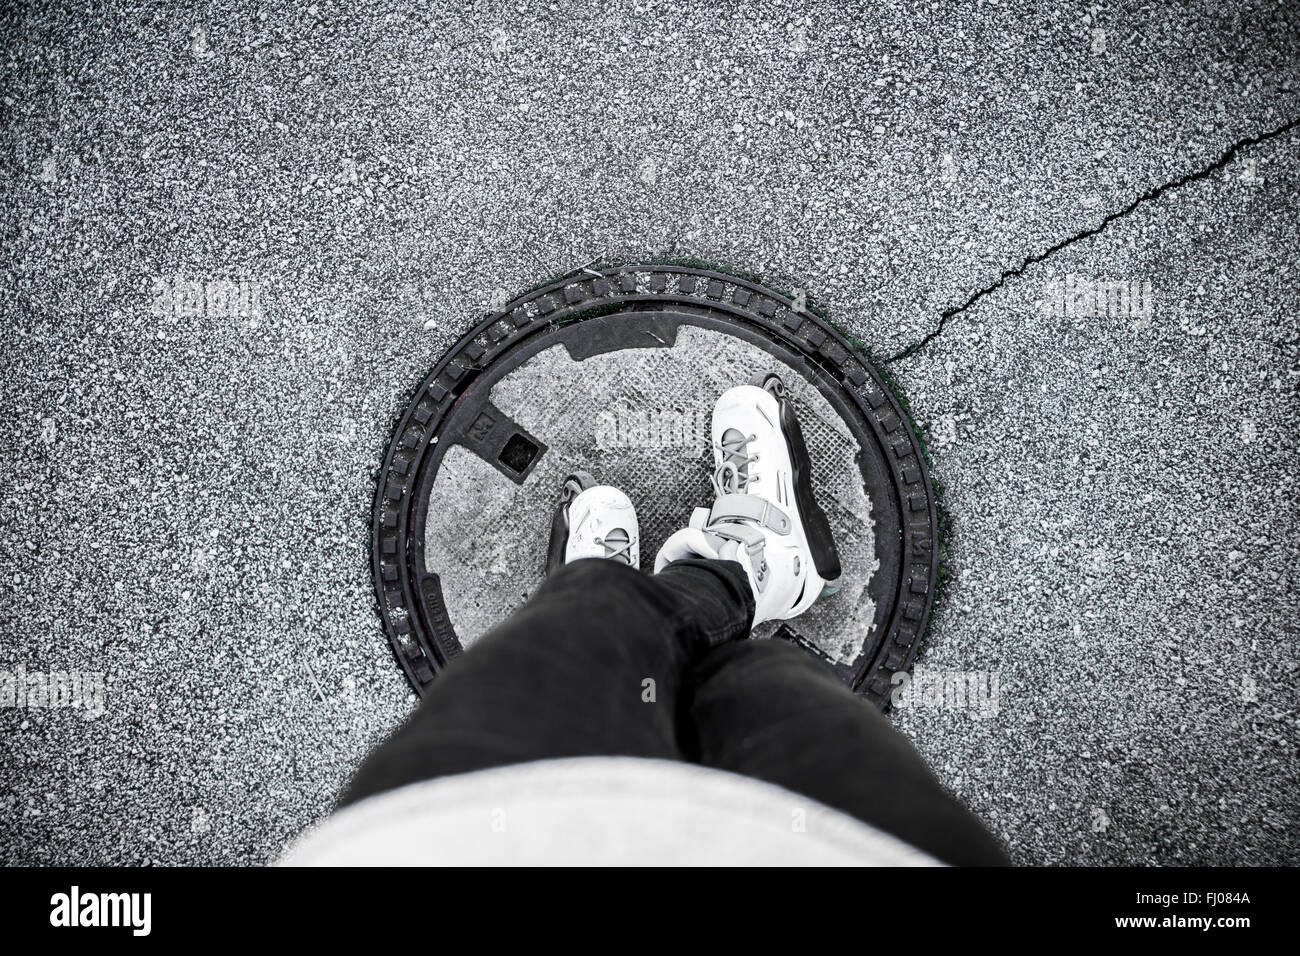 Young man with inline skates standing on manhole cover Stock Photo